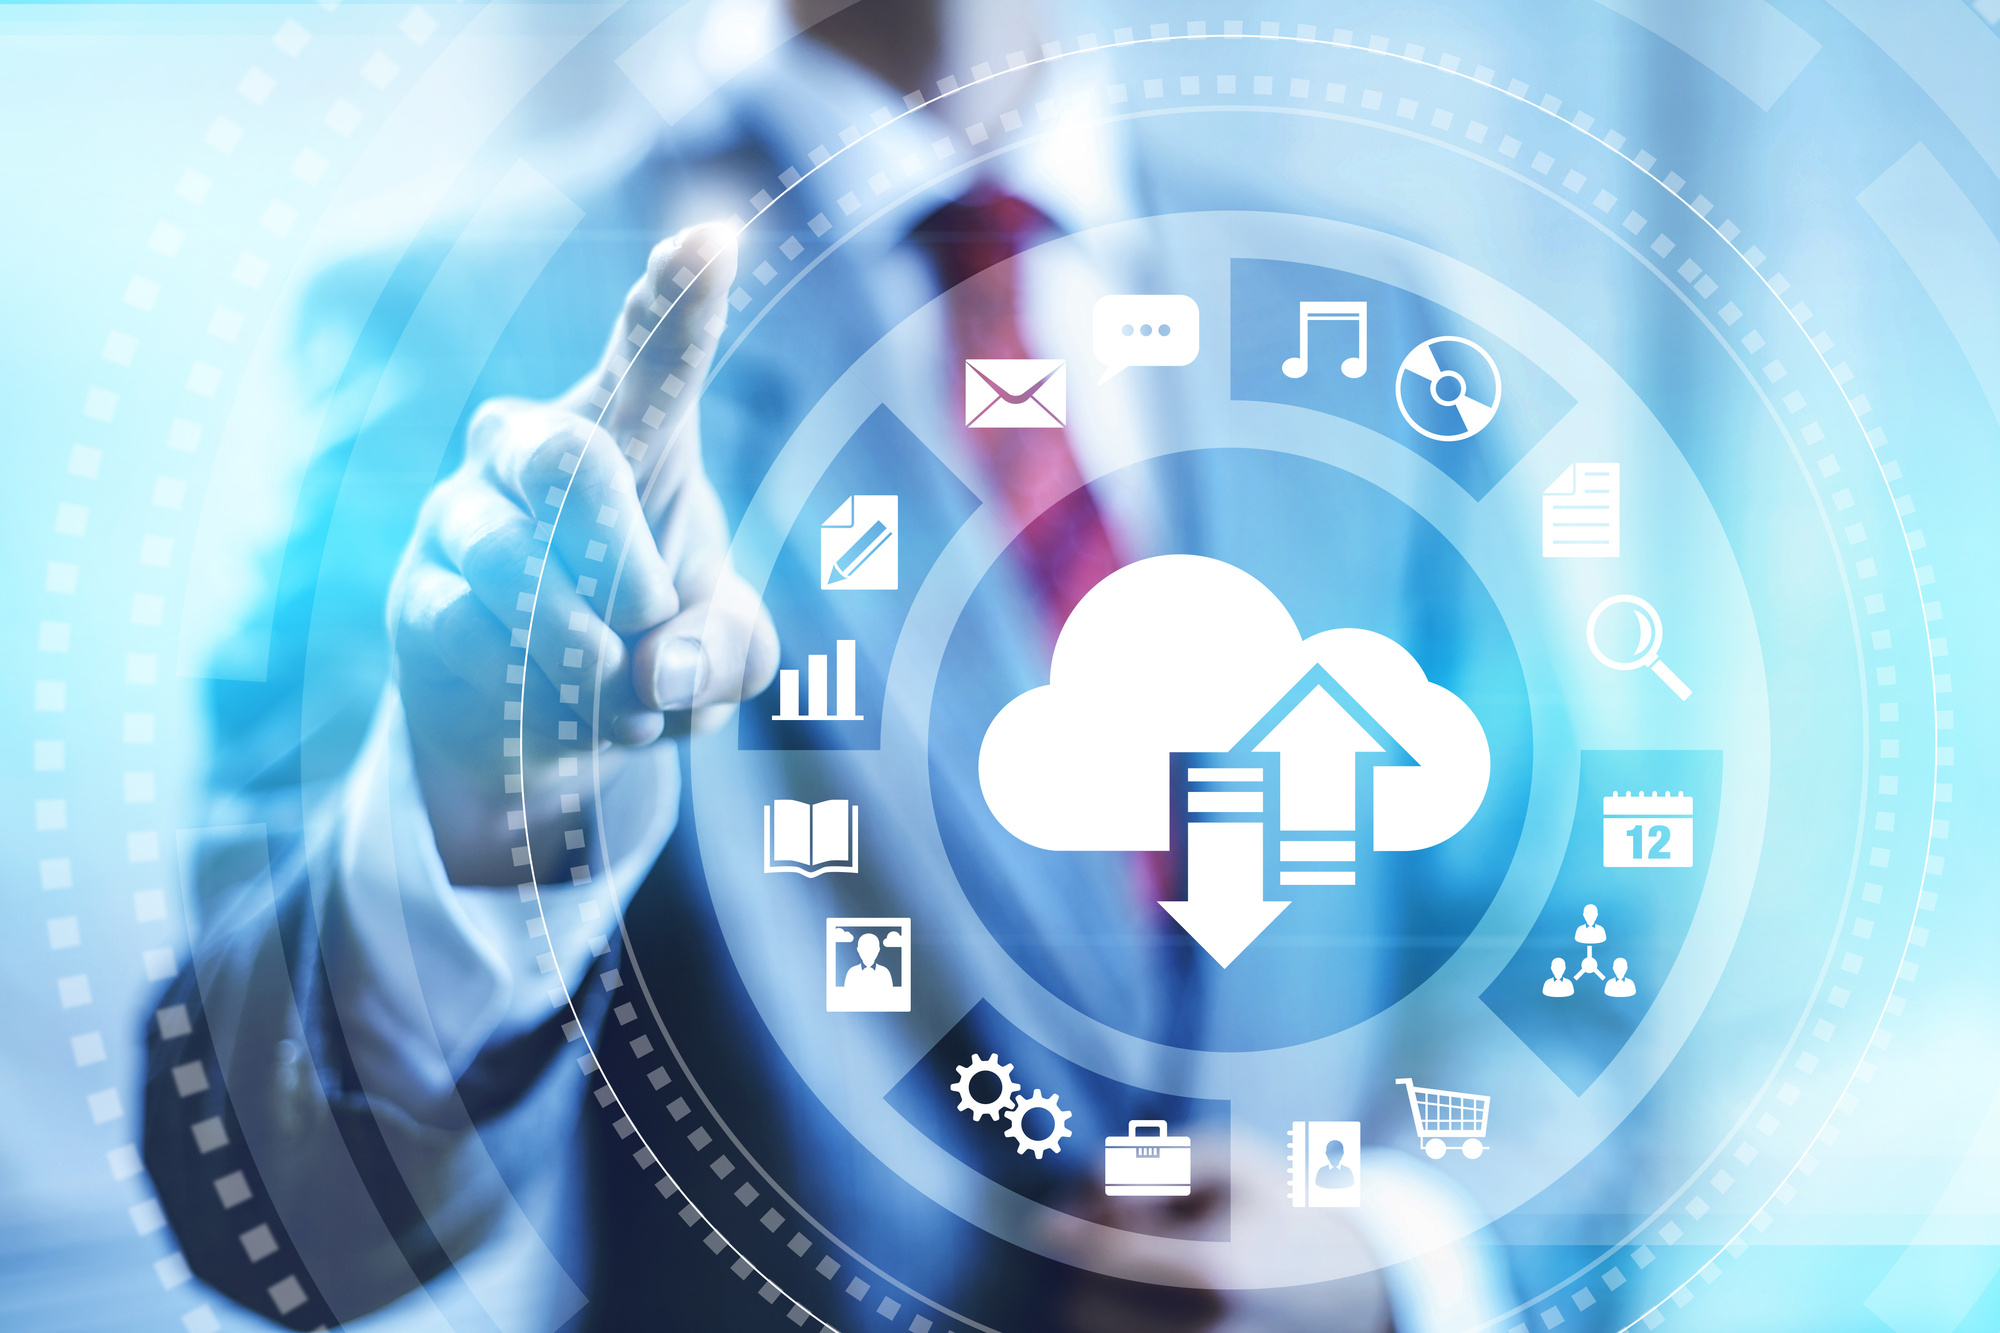 Cloud technology solutions